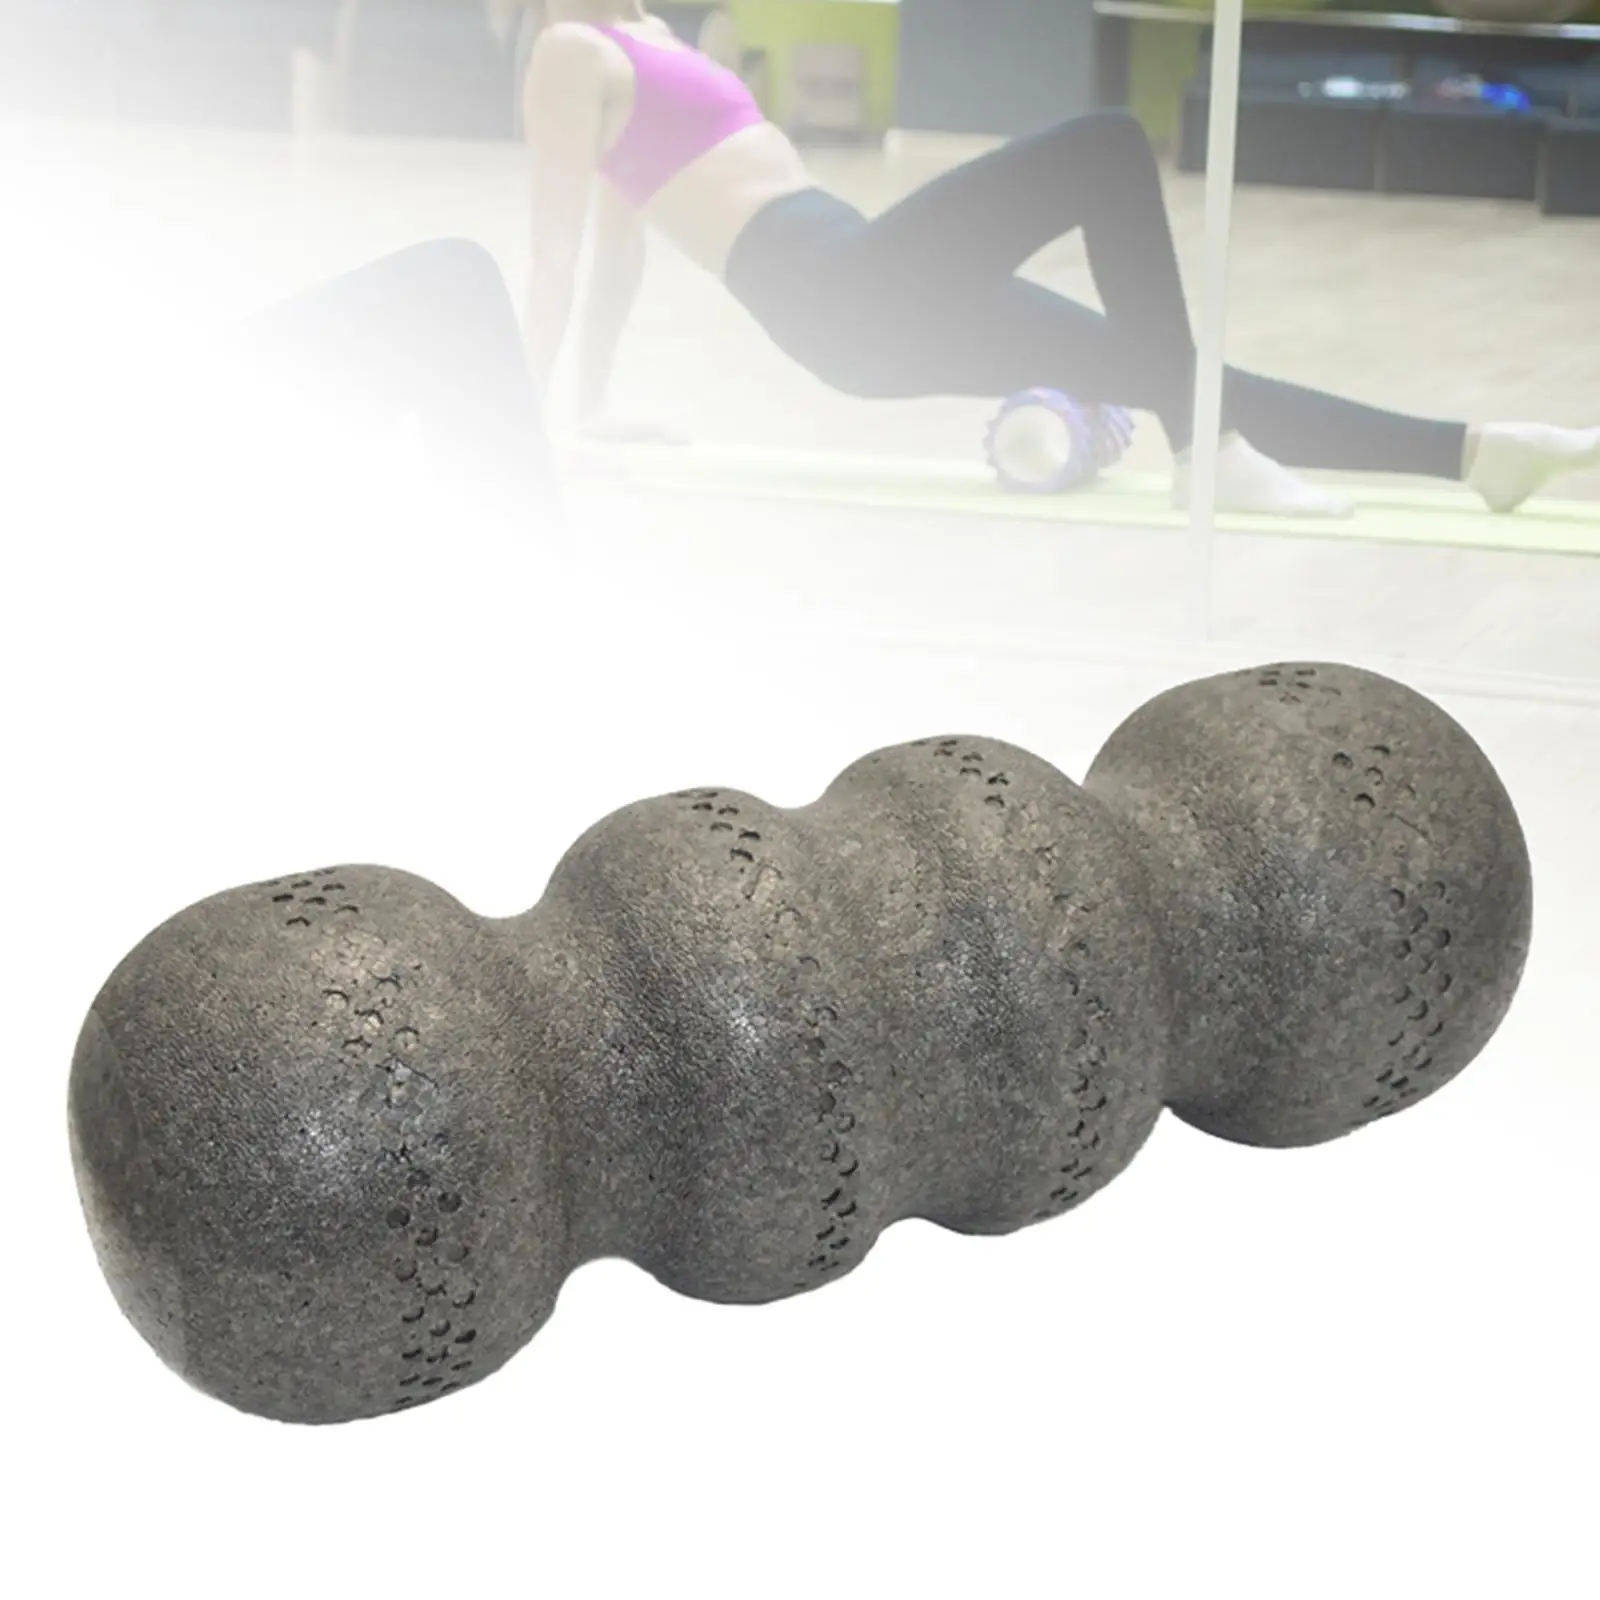 1PC Myofascial Release Deep Muscle Massage Point Relief Sport Pilates EPP Muscle and Back Roller Point Yoga Massager